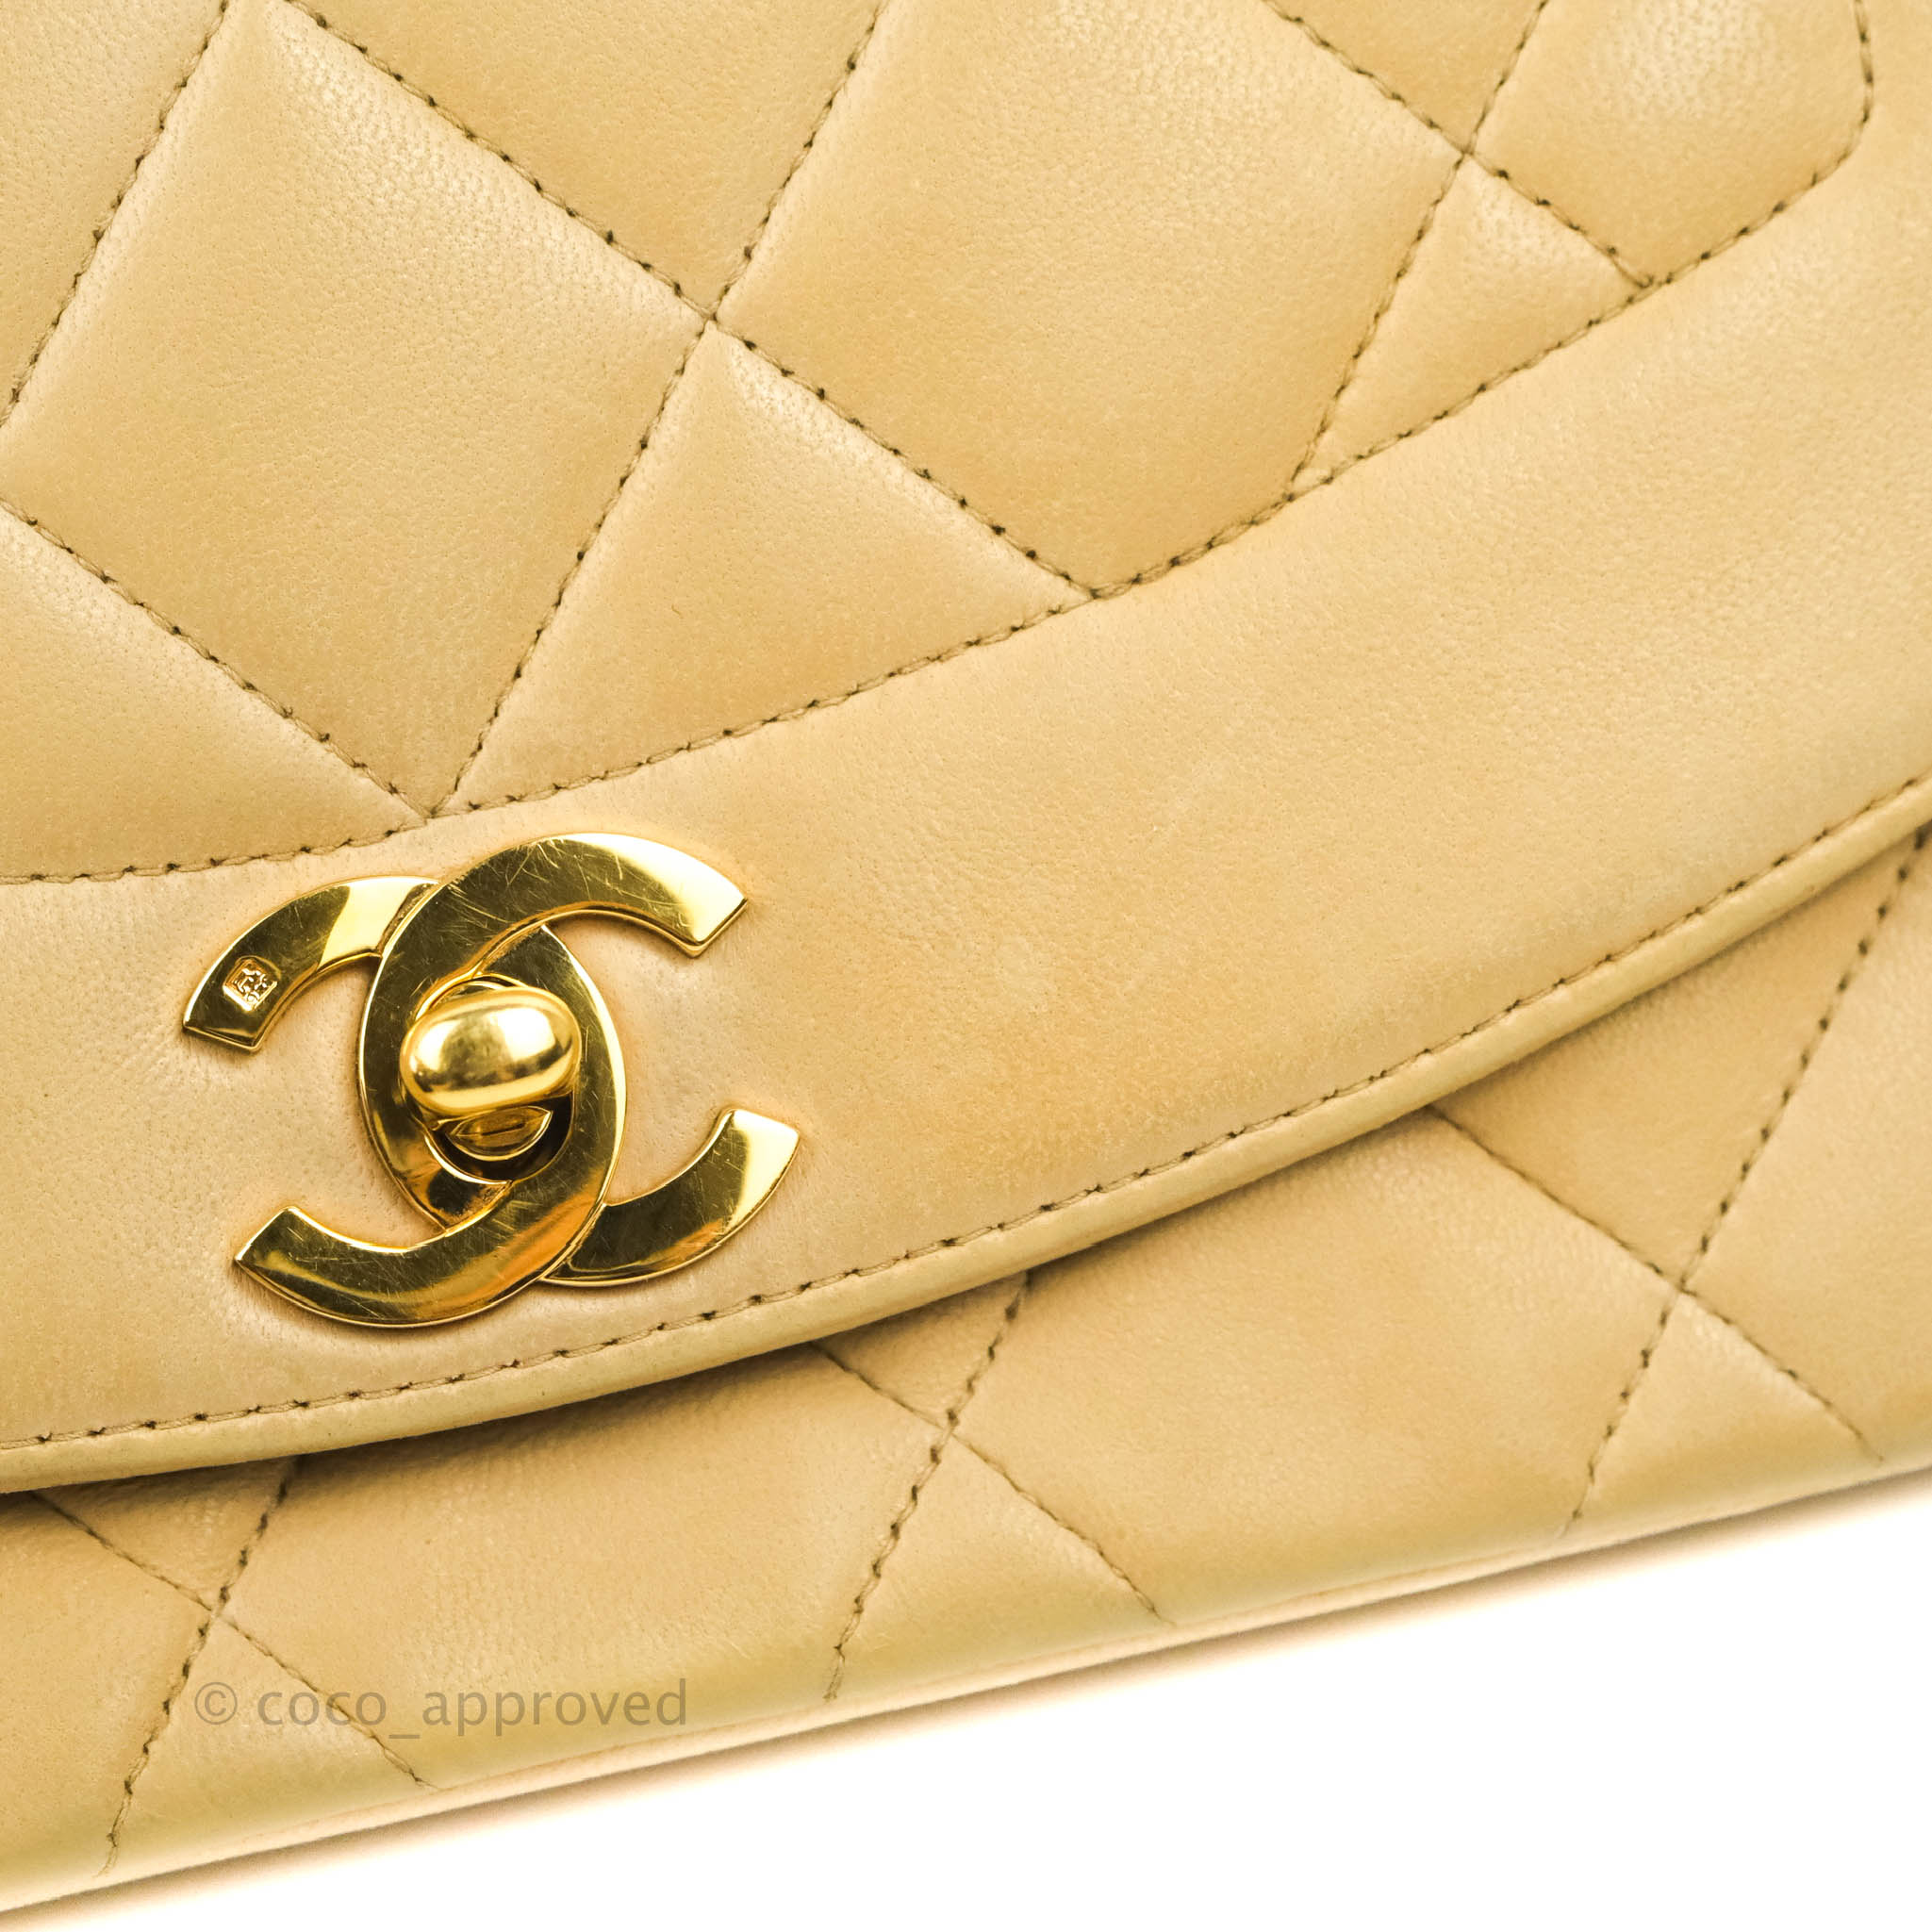 diana chanel flap bag small